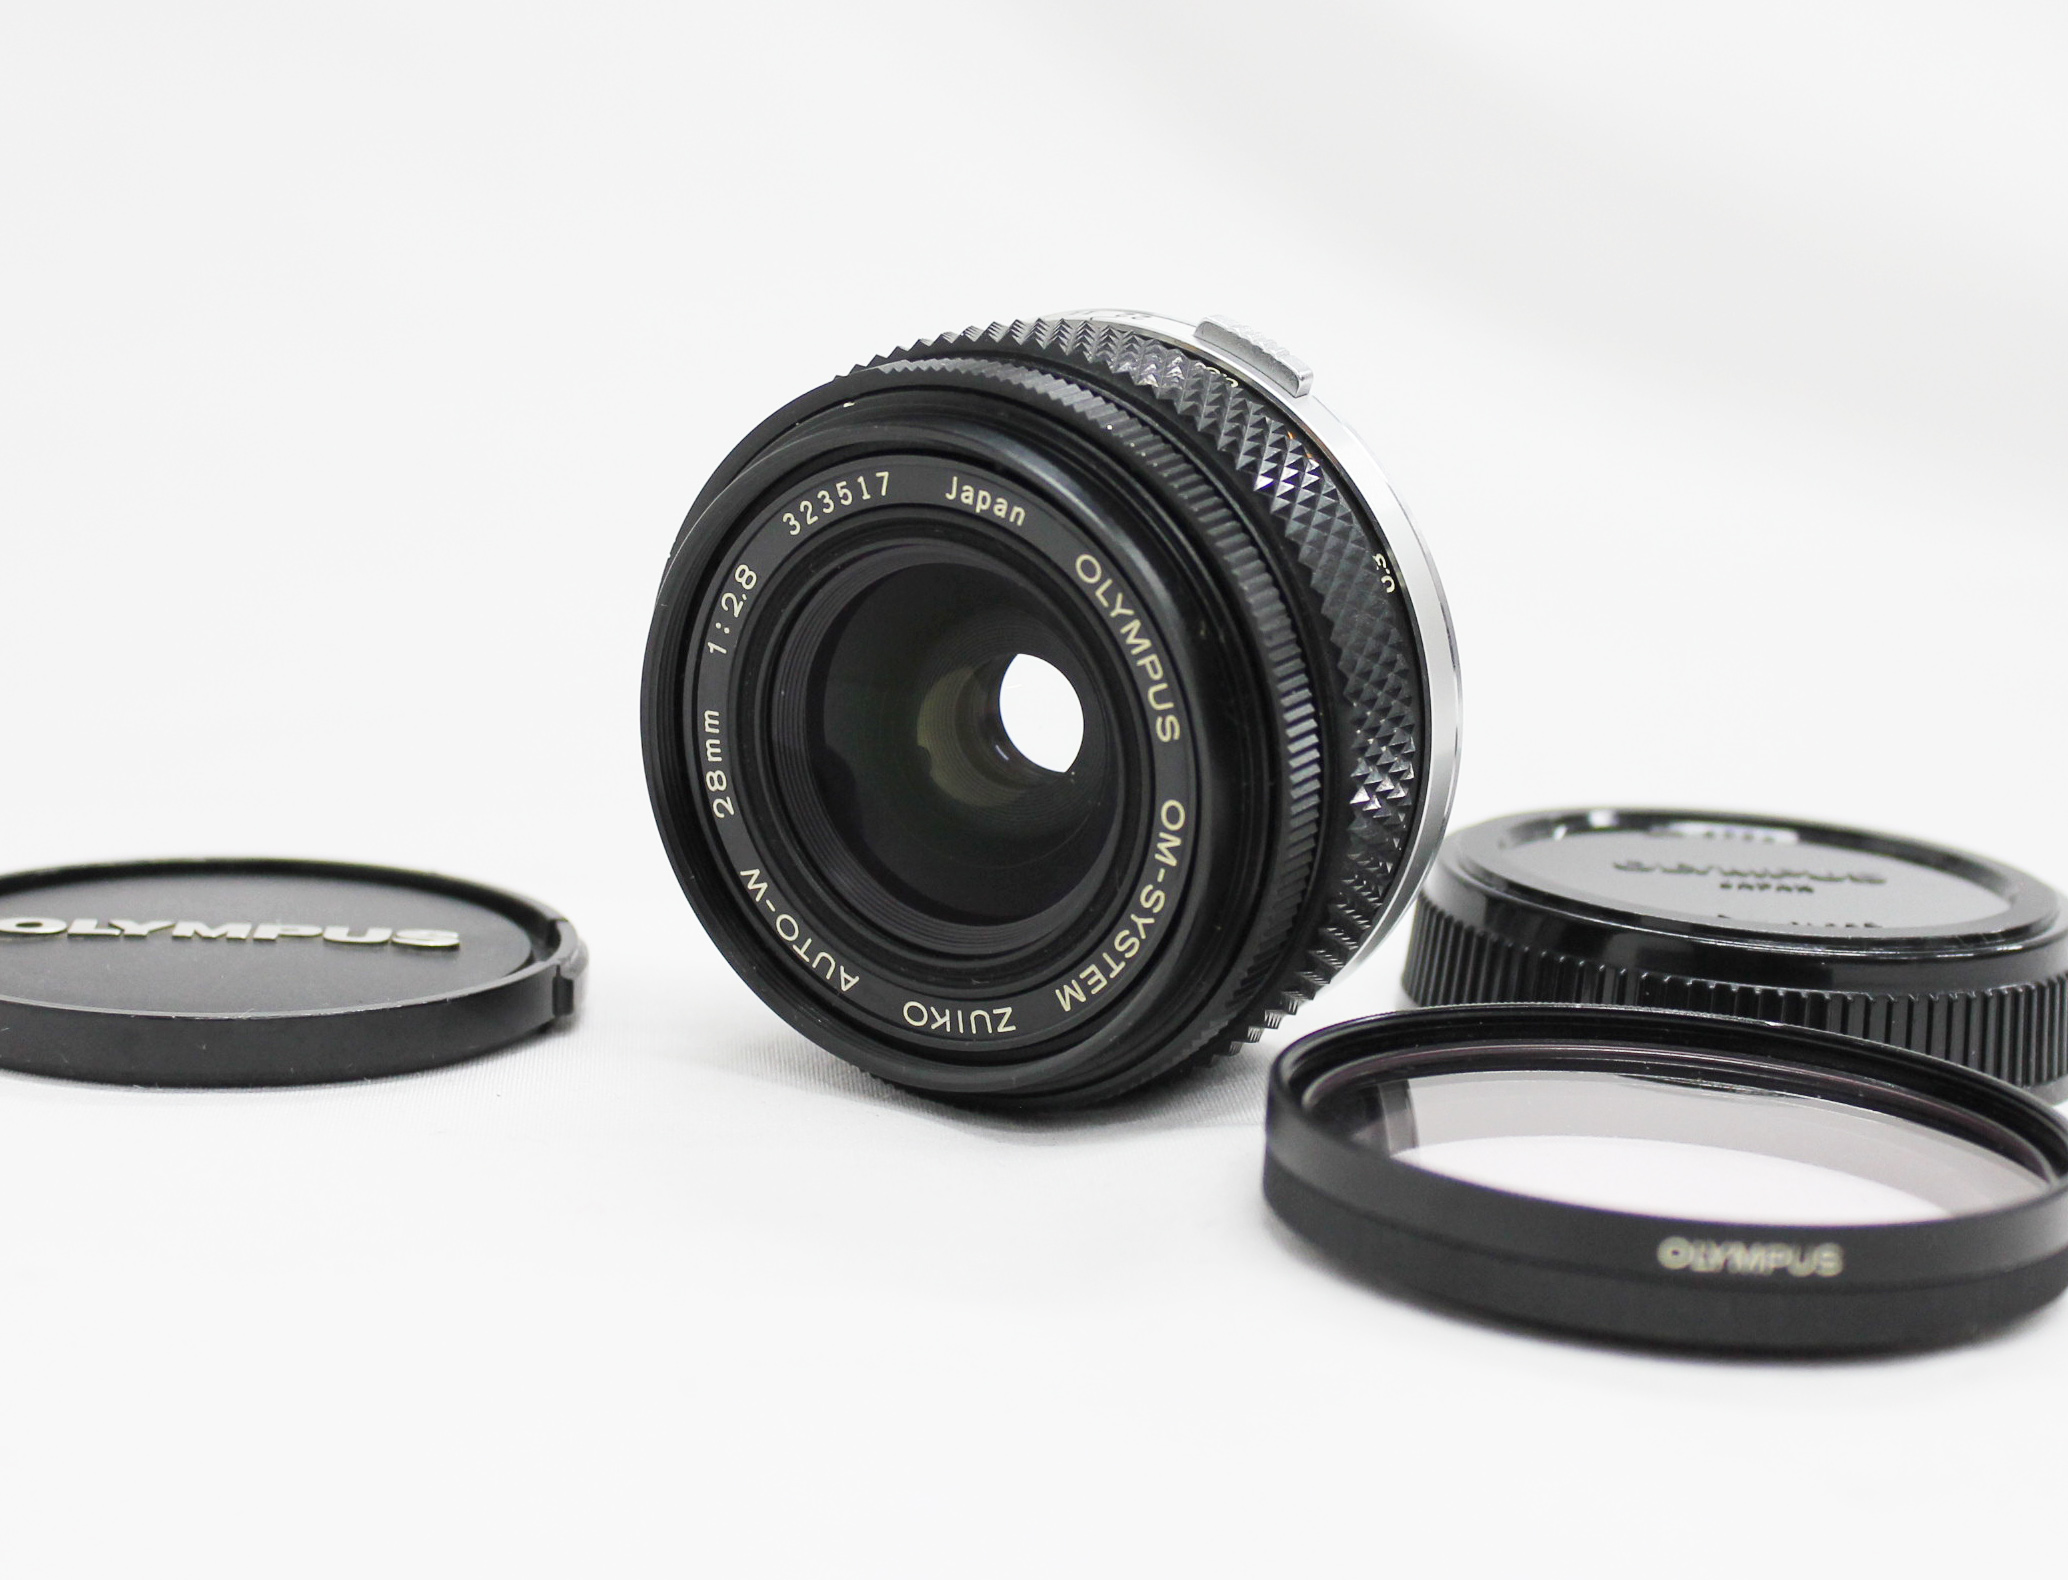 Japan Used Camera Shop | [Near Mint] Olympus OM-System Zuiko Auto-W 28mm F/2.8 Wide Angle Lens from Japan